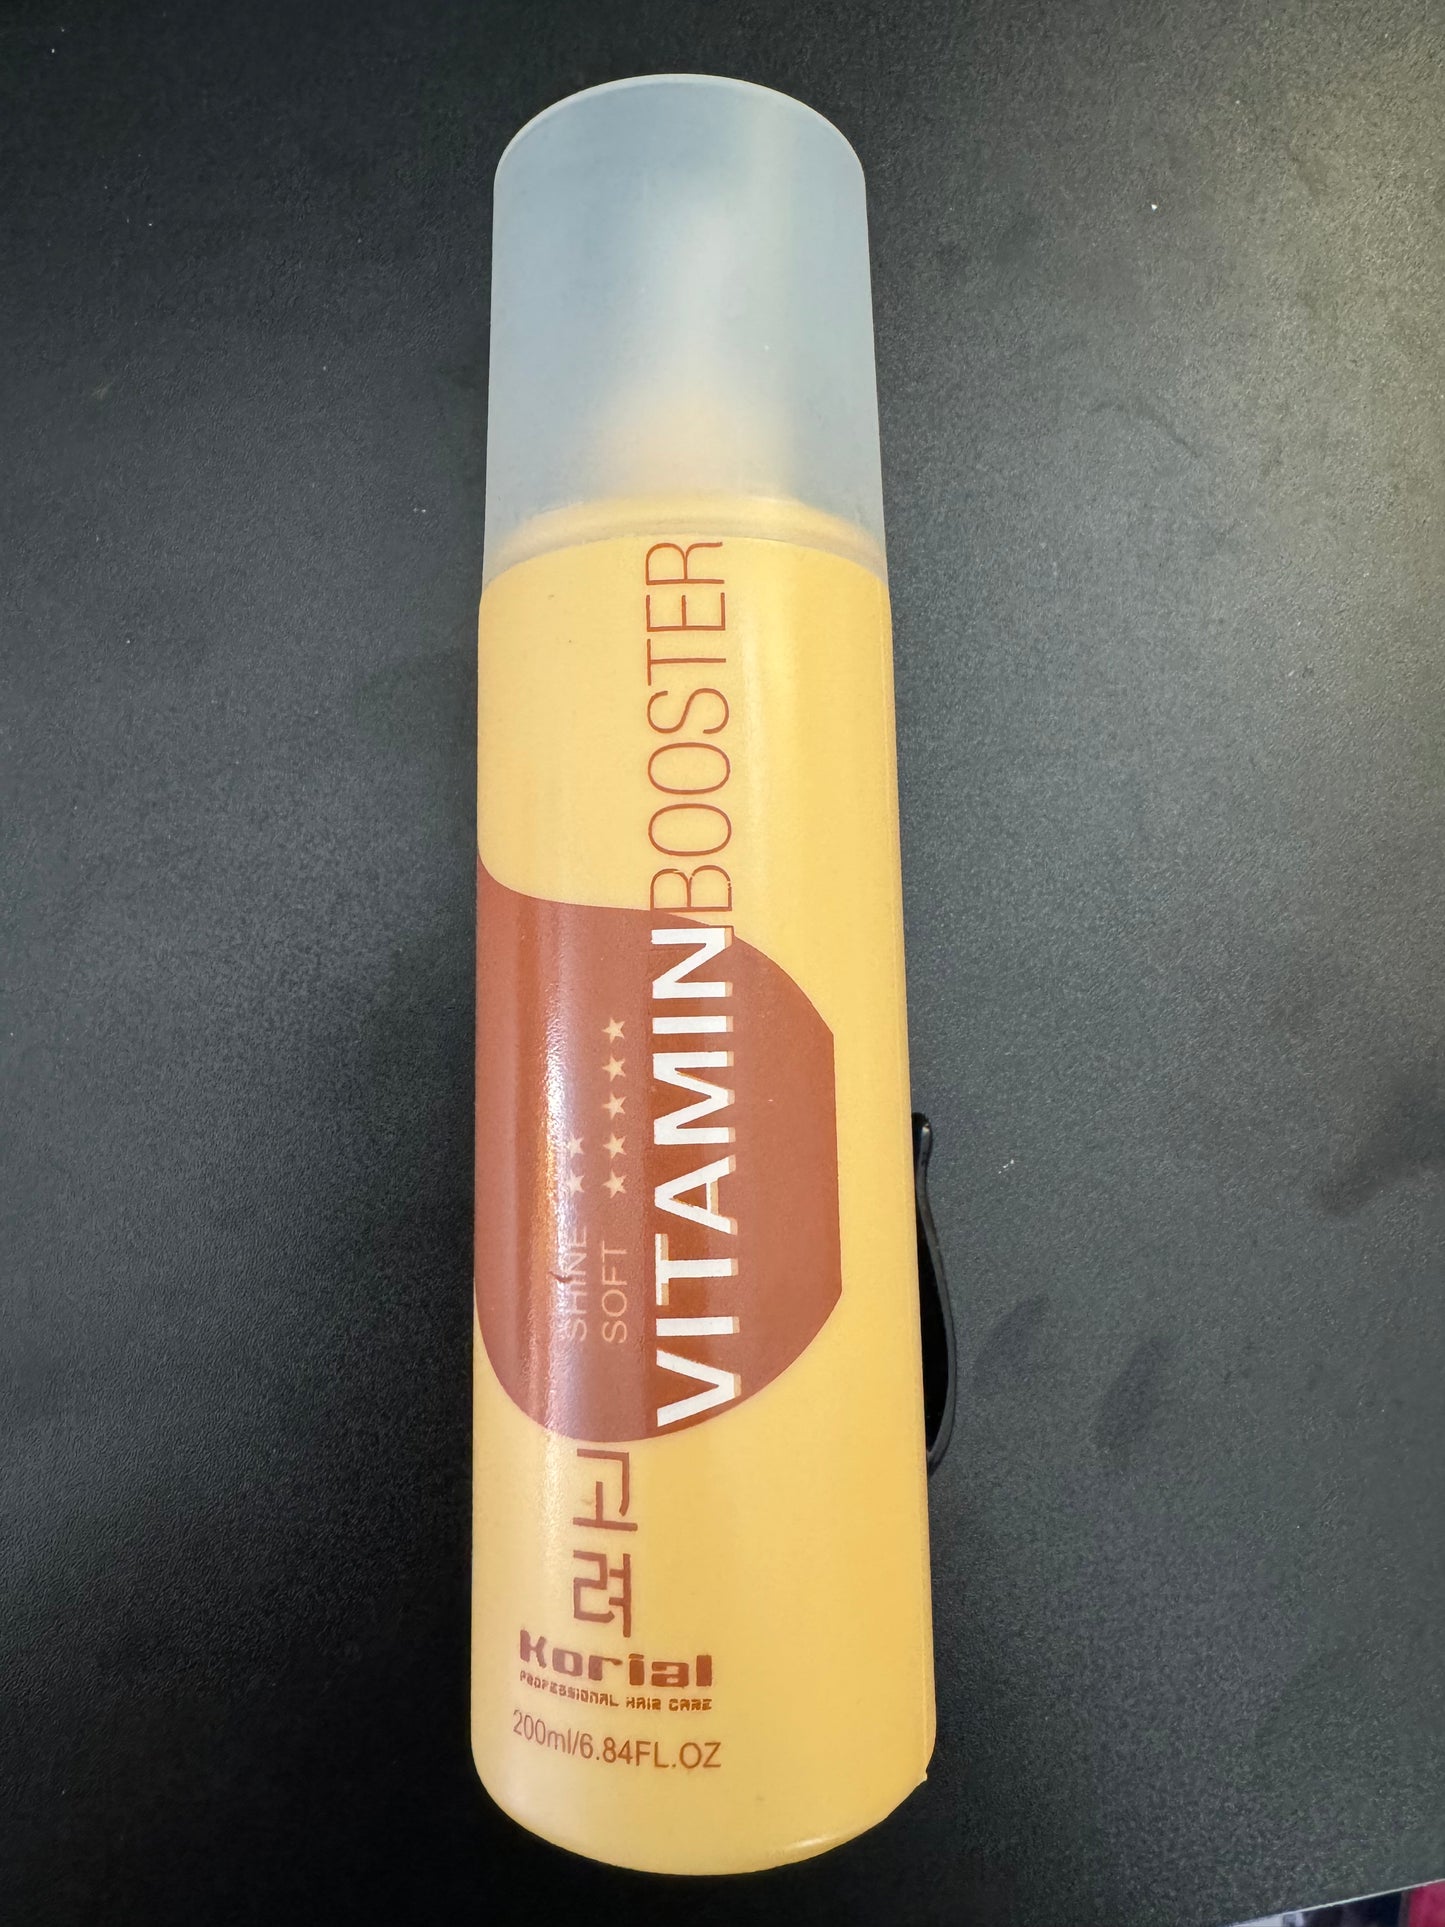 Vitamin booster, (hair care and smoothness)Vitamin booster